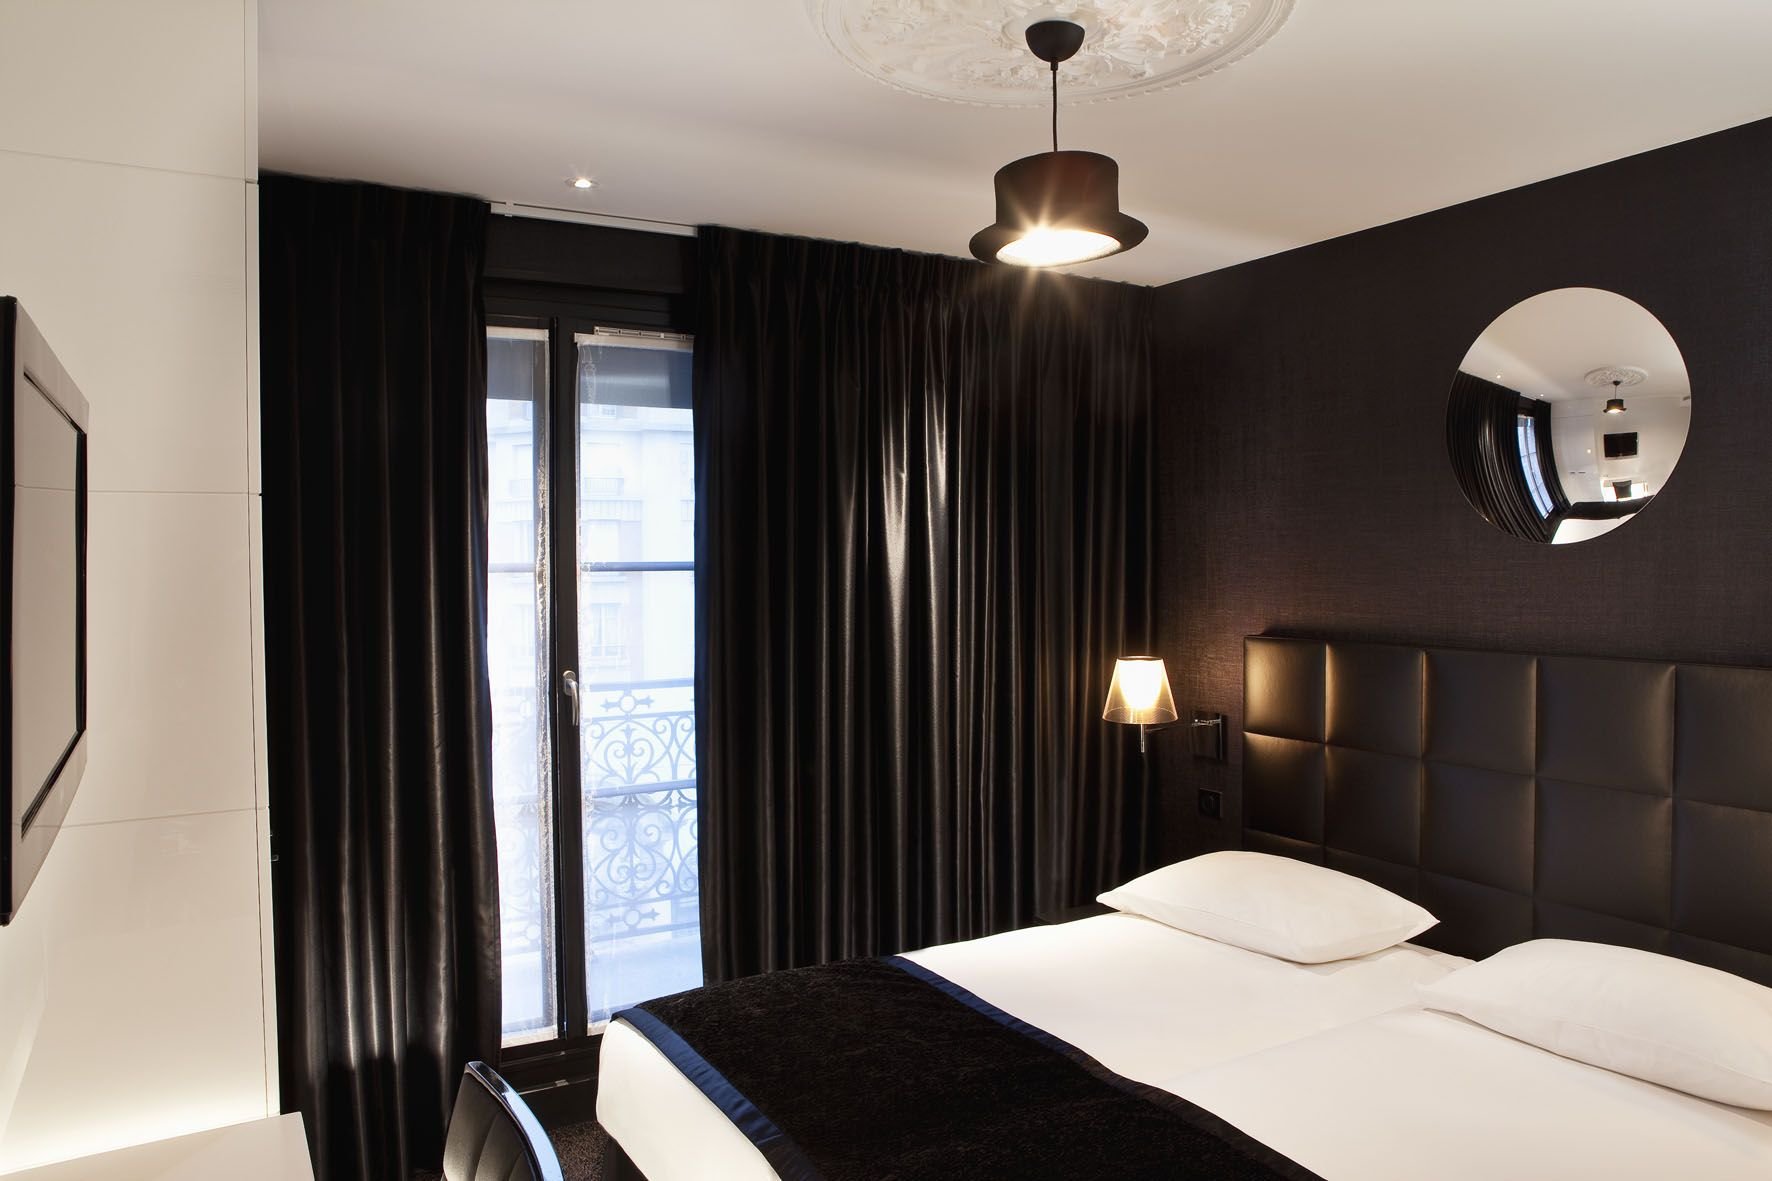 366/Chambres/First_Hotel_Chambre_17.jpg